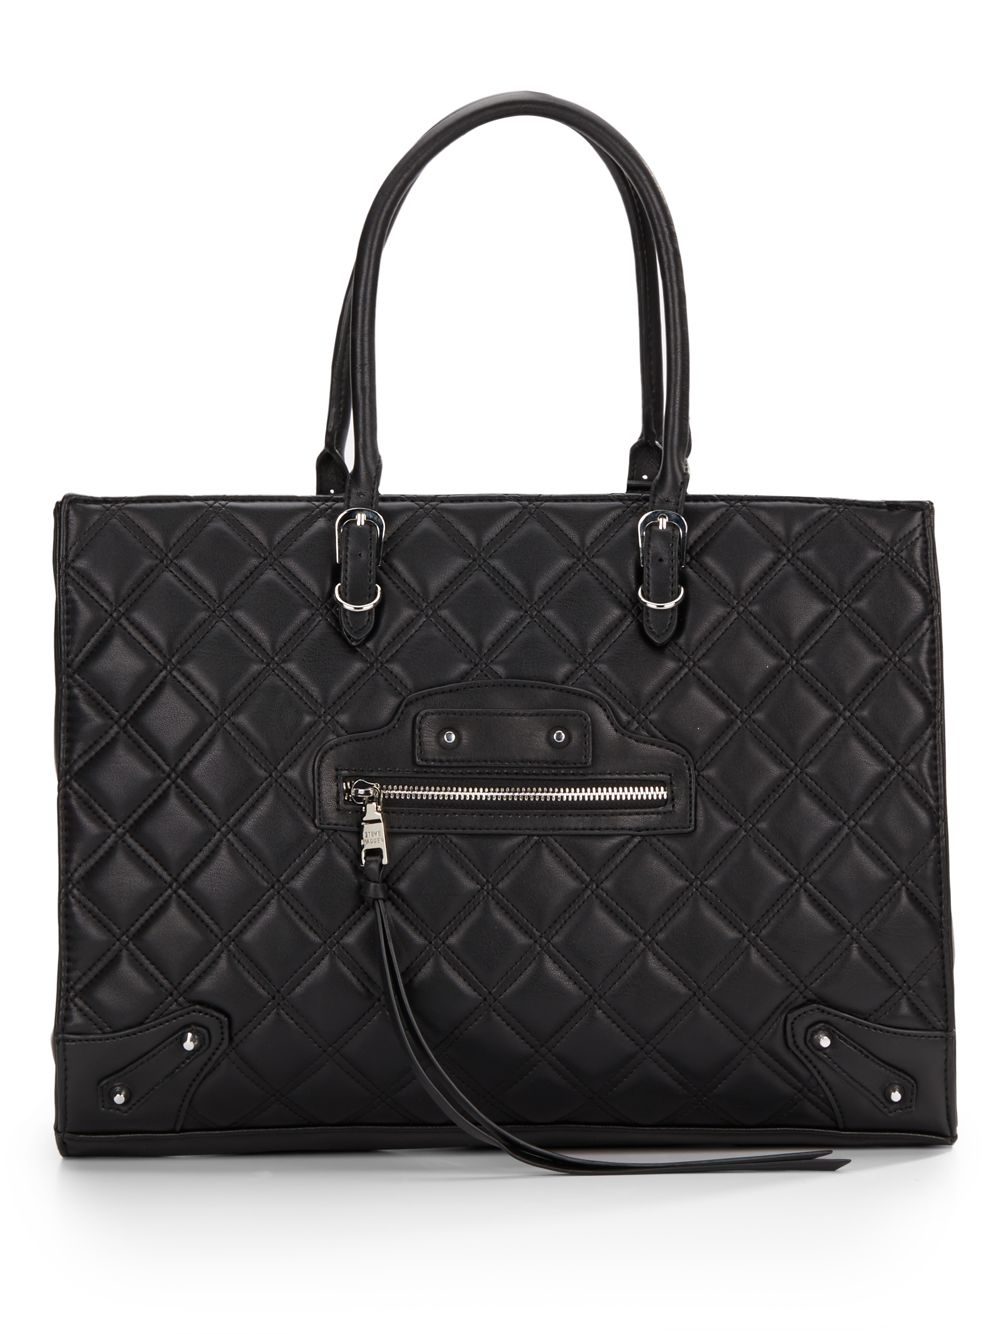 Steve Madden Zinnia Quilted Tote Bag in Black - Lyst